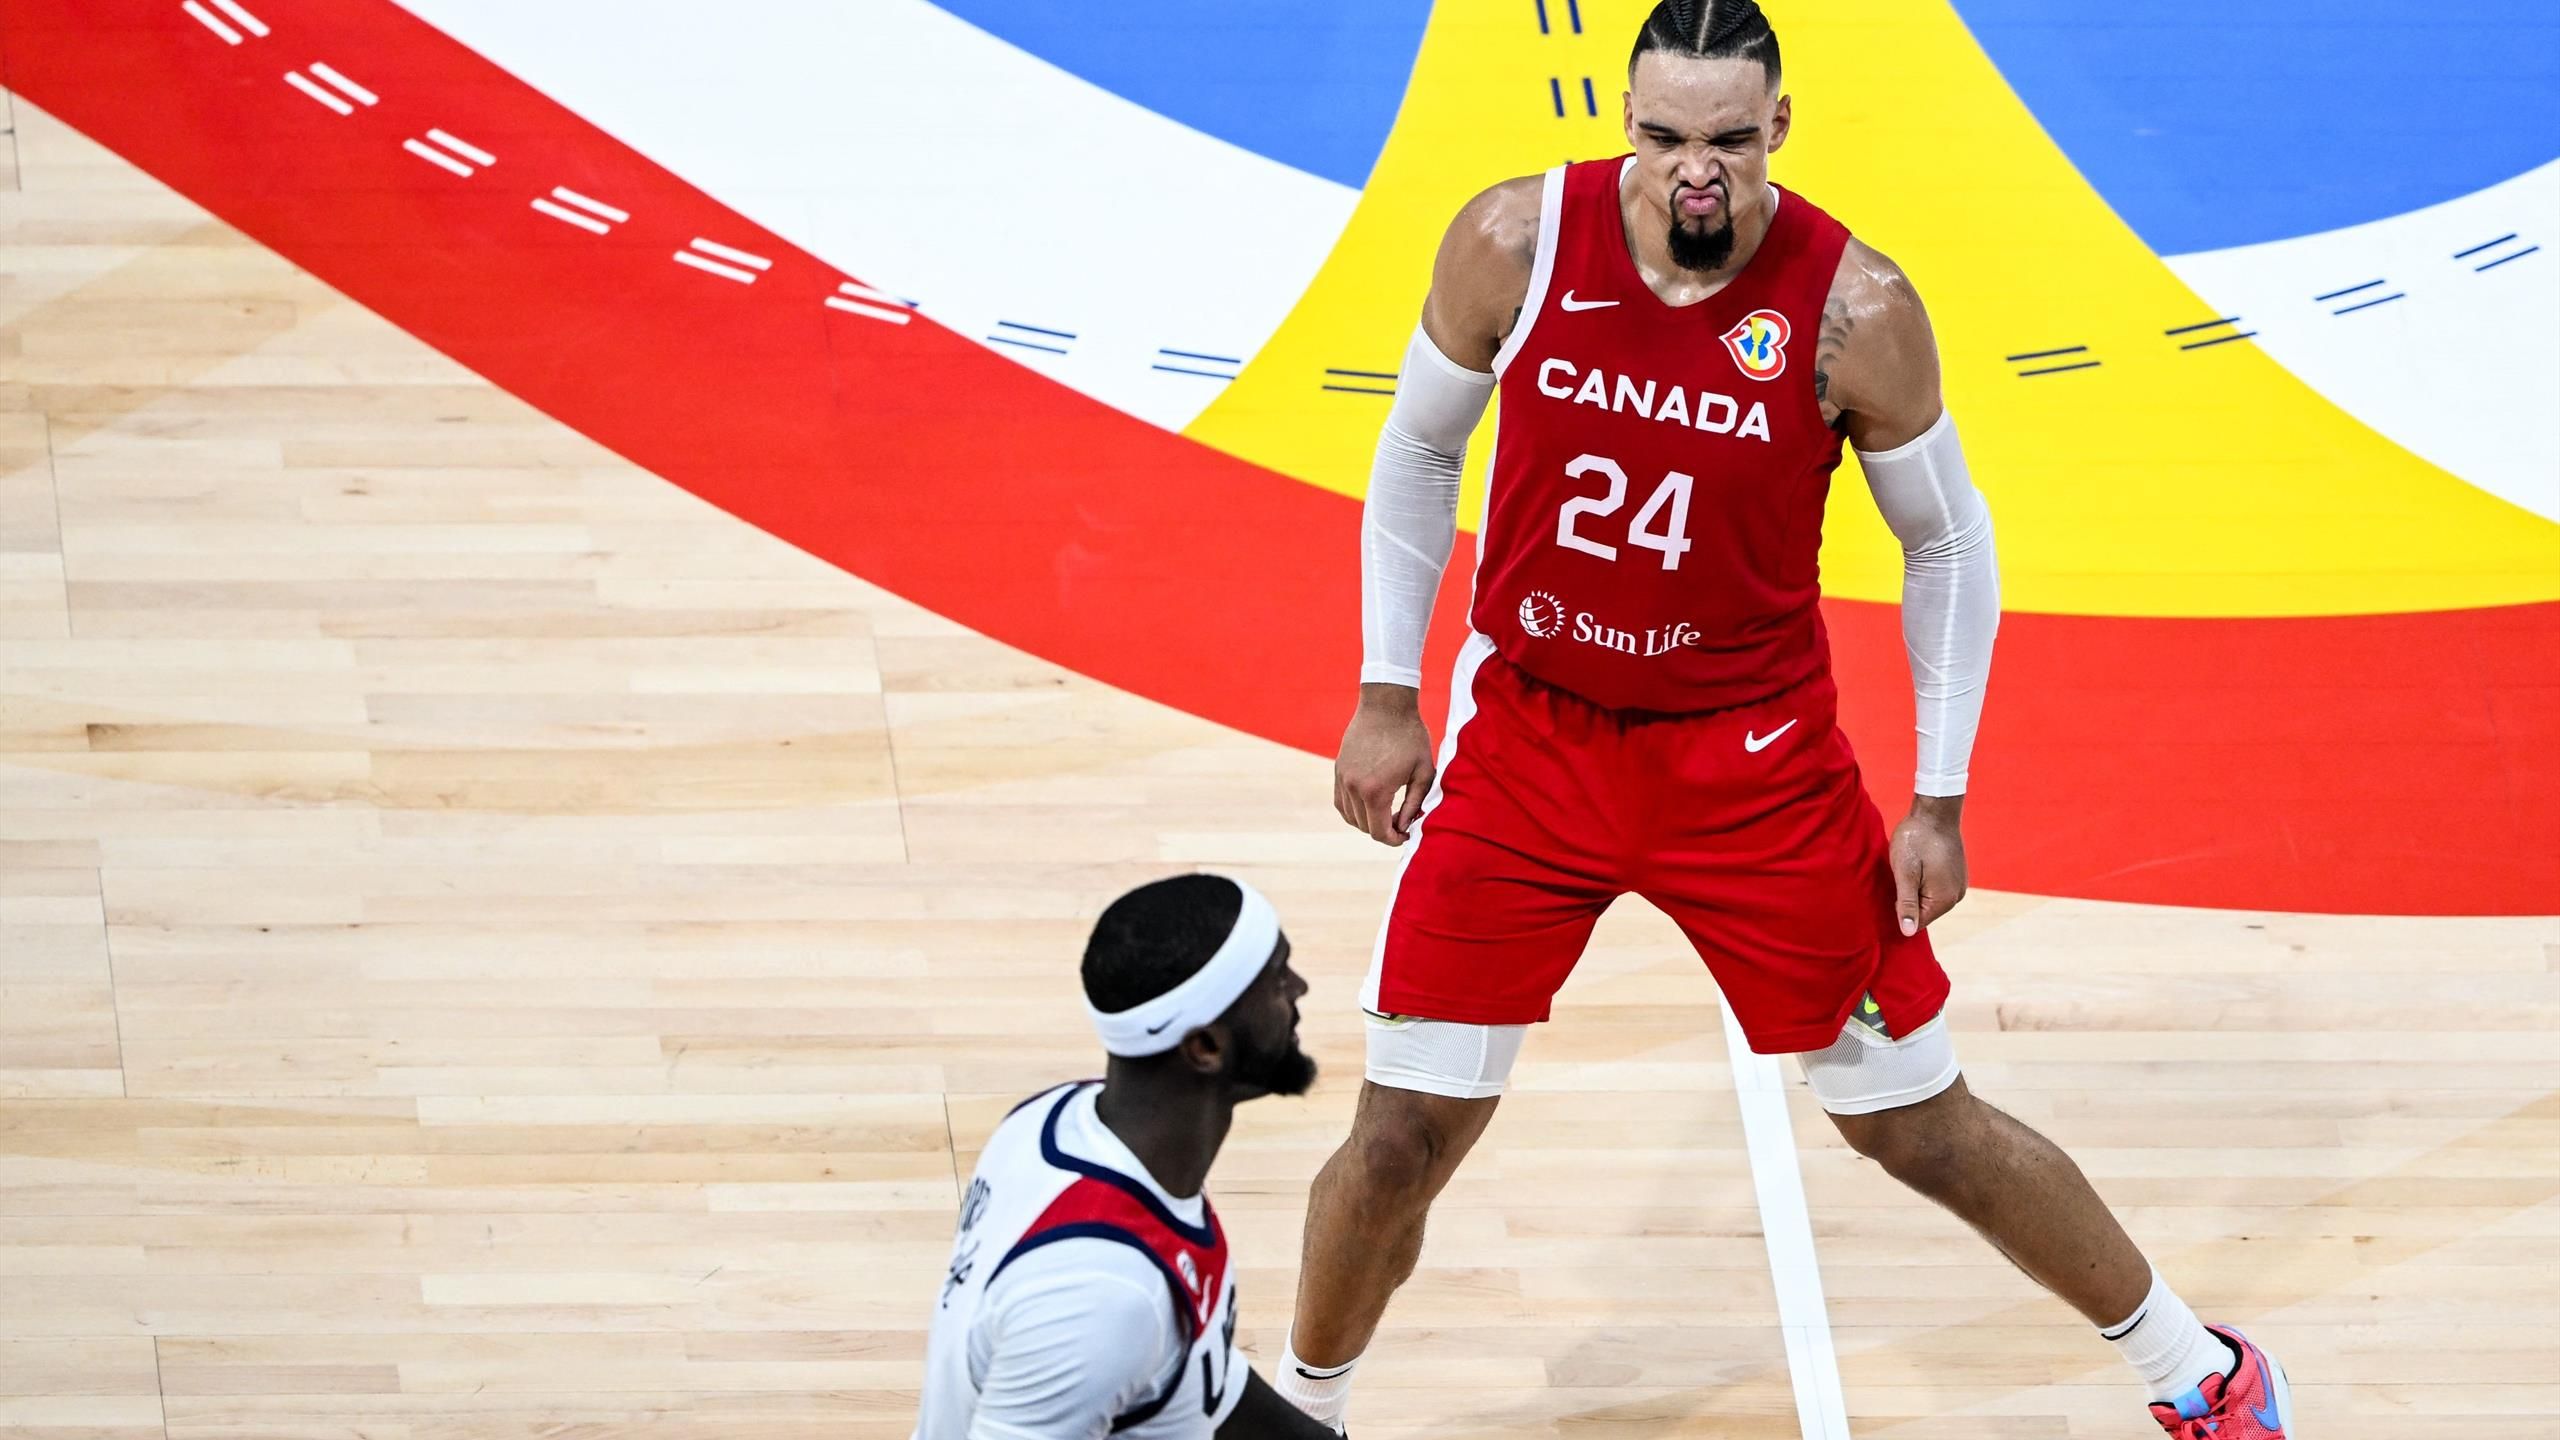 The US basketball team, considered the front-runner, missed out on a World Cup medal again